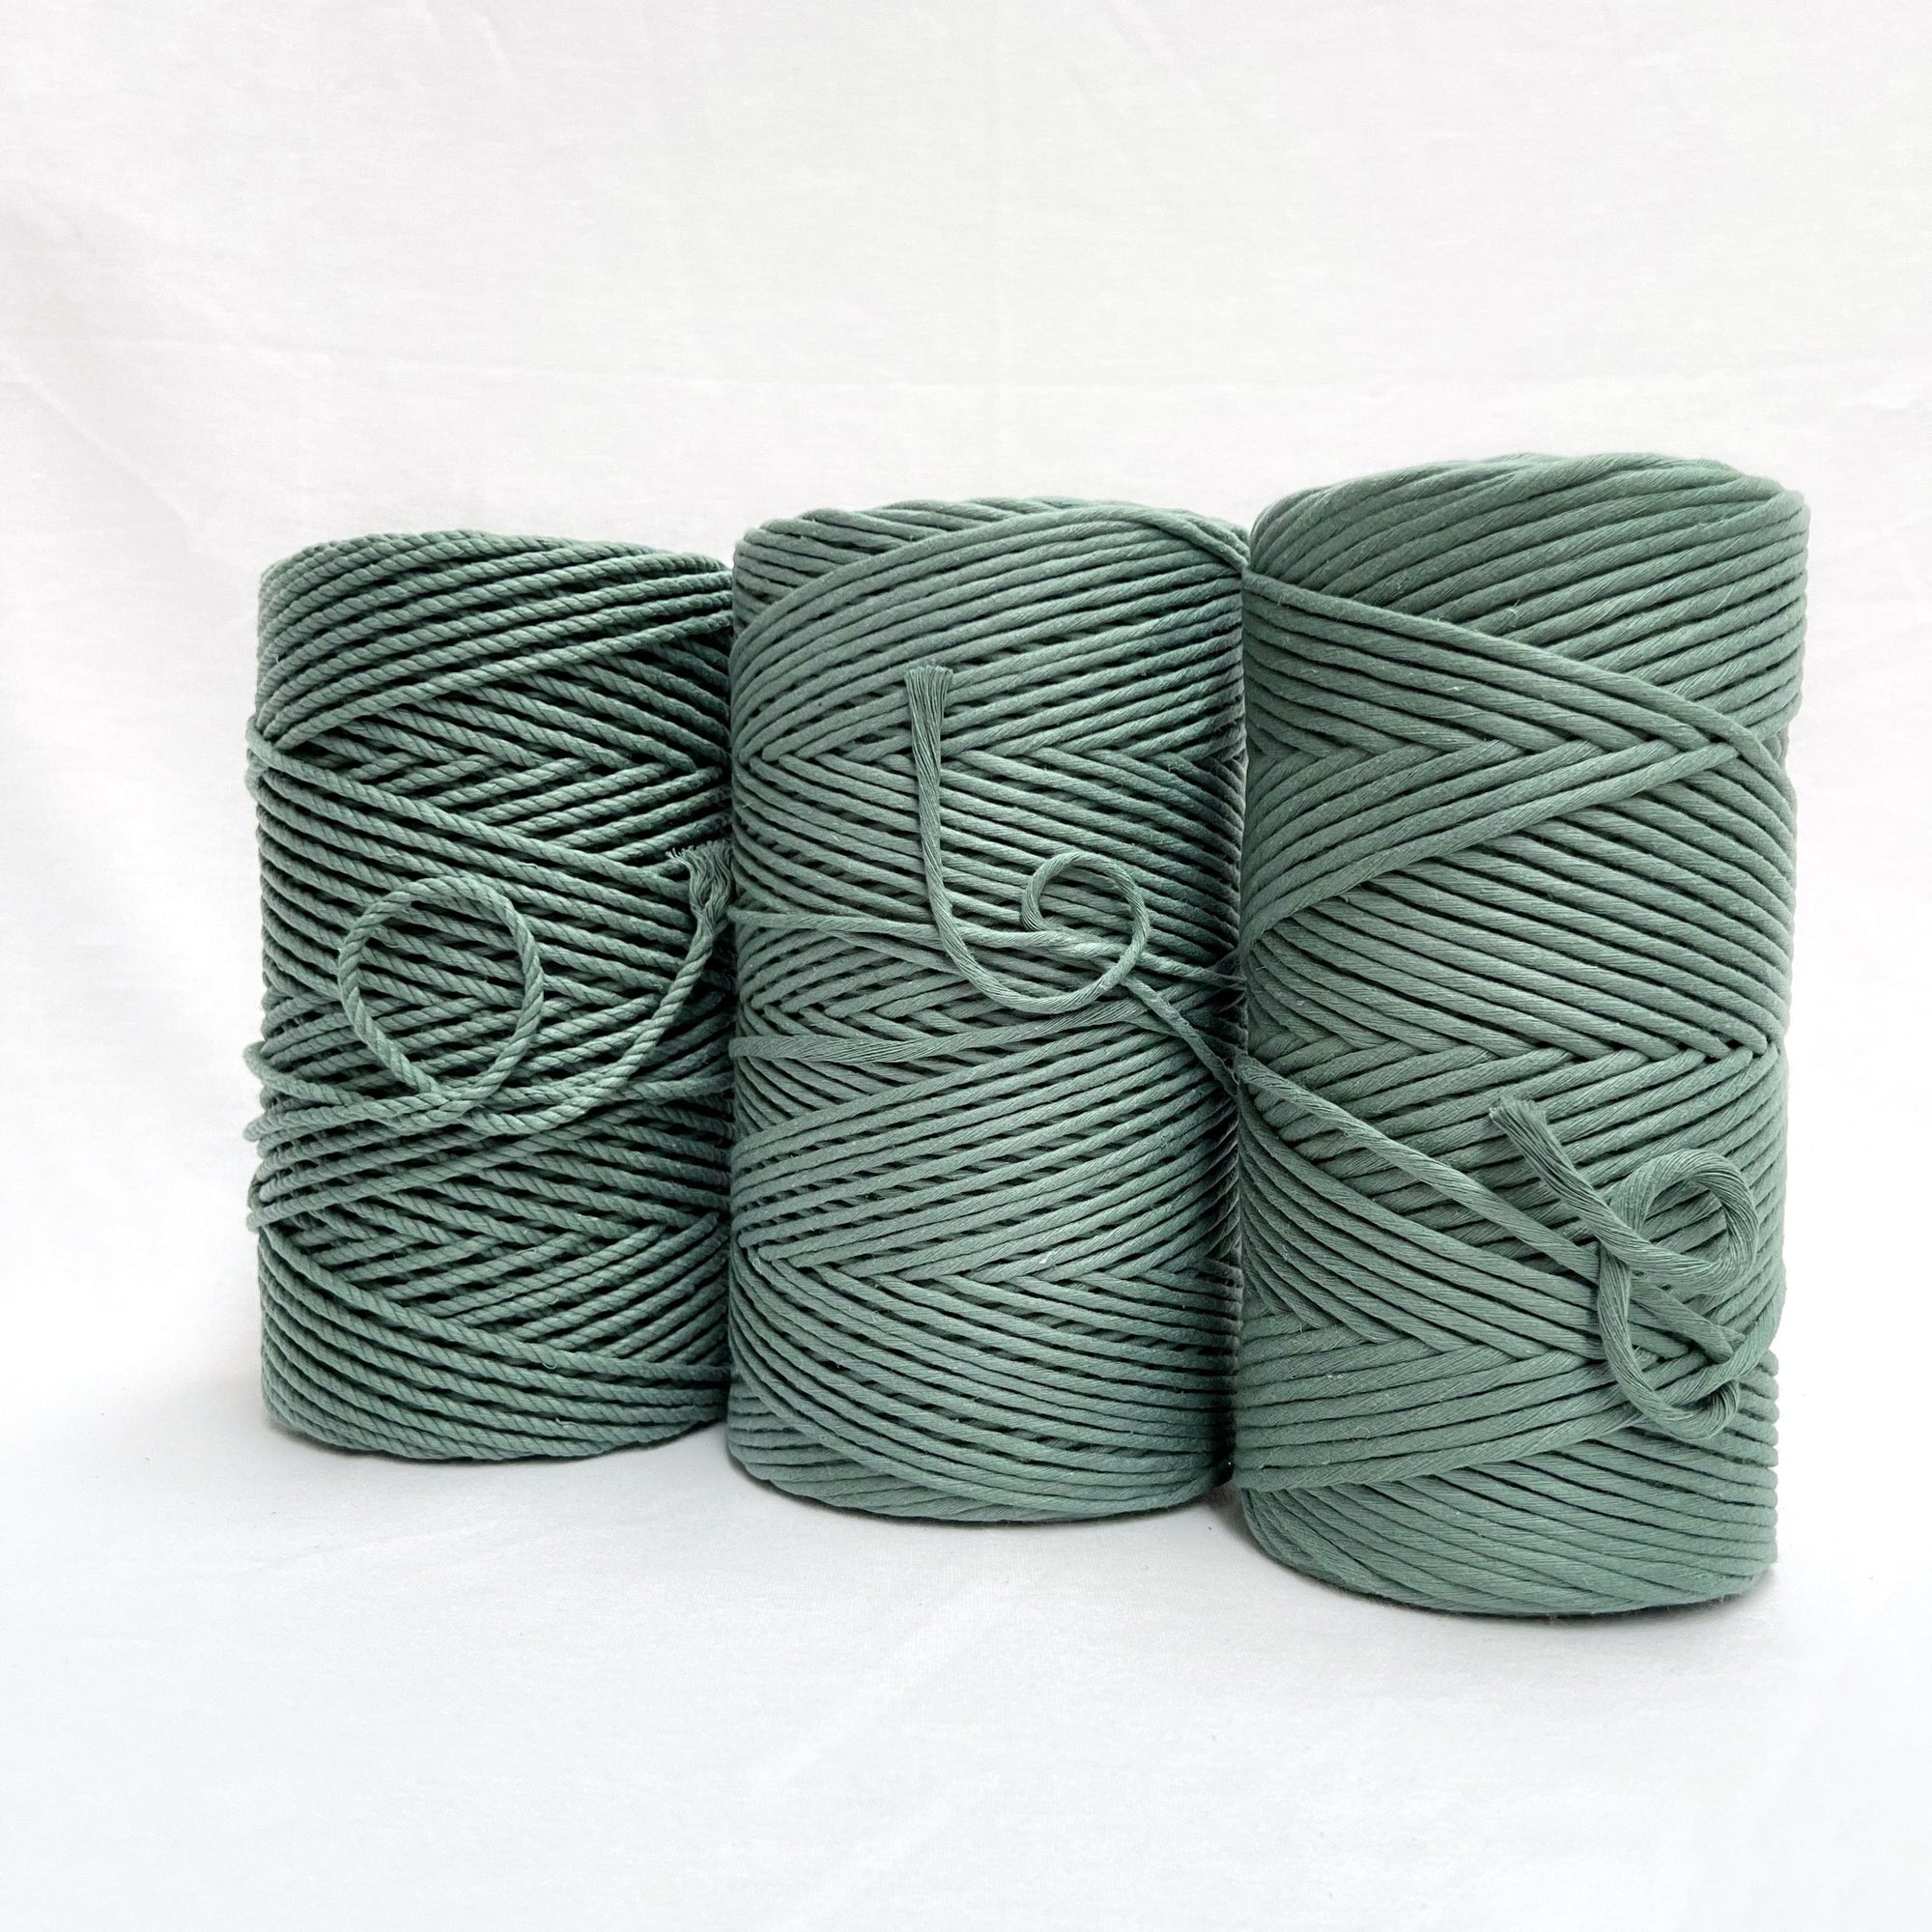 mary maker studio 1kg 5mm recycled cotton macrame string in dusty winter green colour buy online for macrame workshops beginners and advanced artists